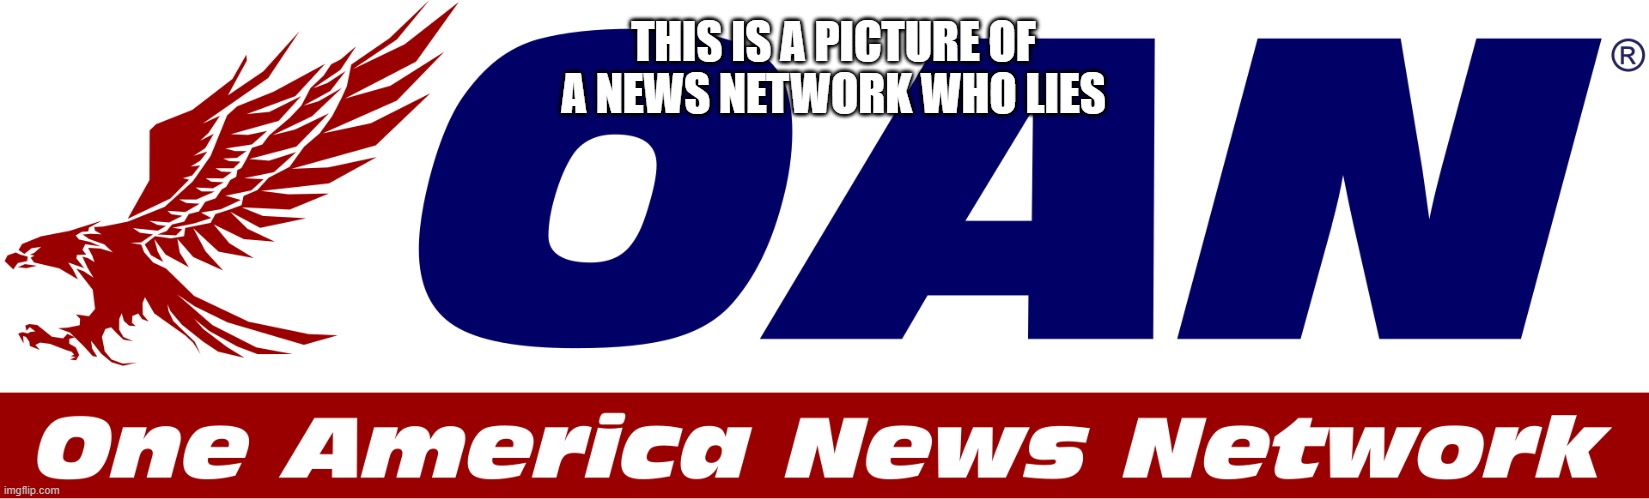 All they do is lie, lie, and lie more. Also Kion lies and lies and lies some more | THIS IS A PICTURE OF A NEWS NETWORK WHO LIES | image tagged in one america news logo,memes,president_joe_biden,news,fake news,one america news | made w/ Imgflip meme maker